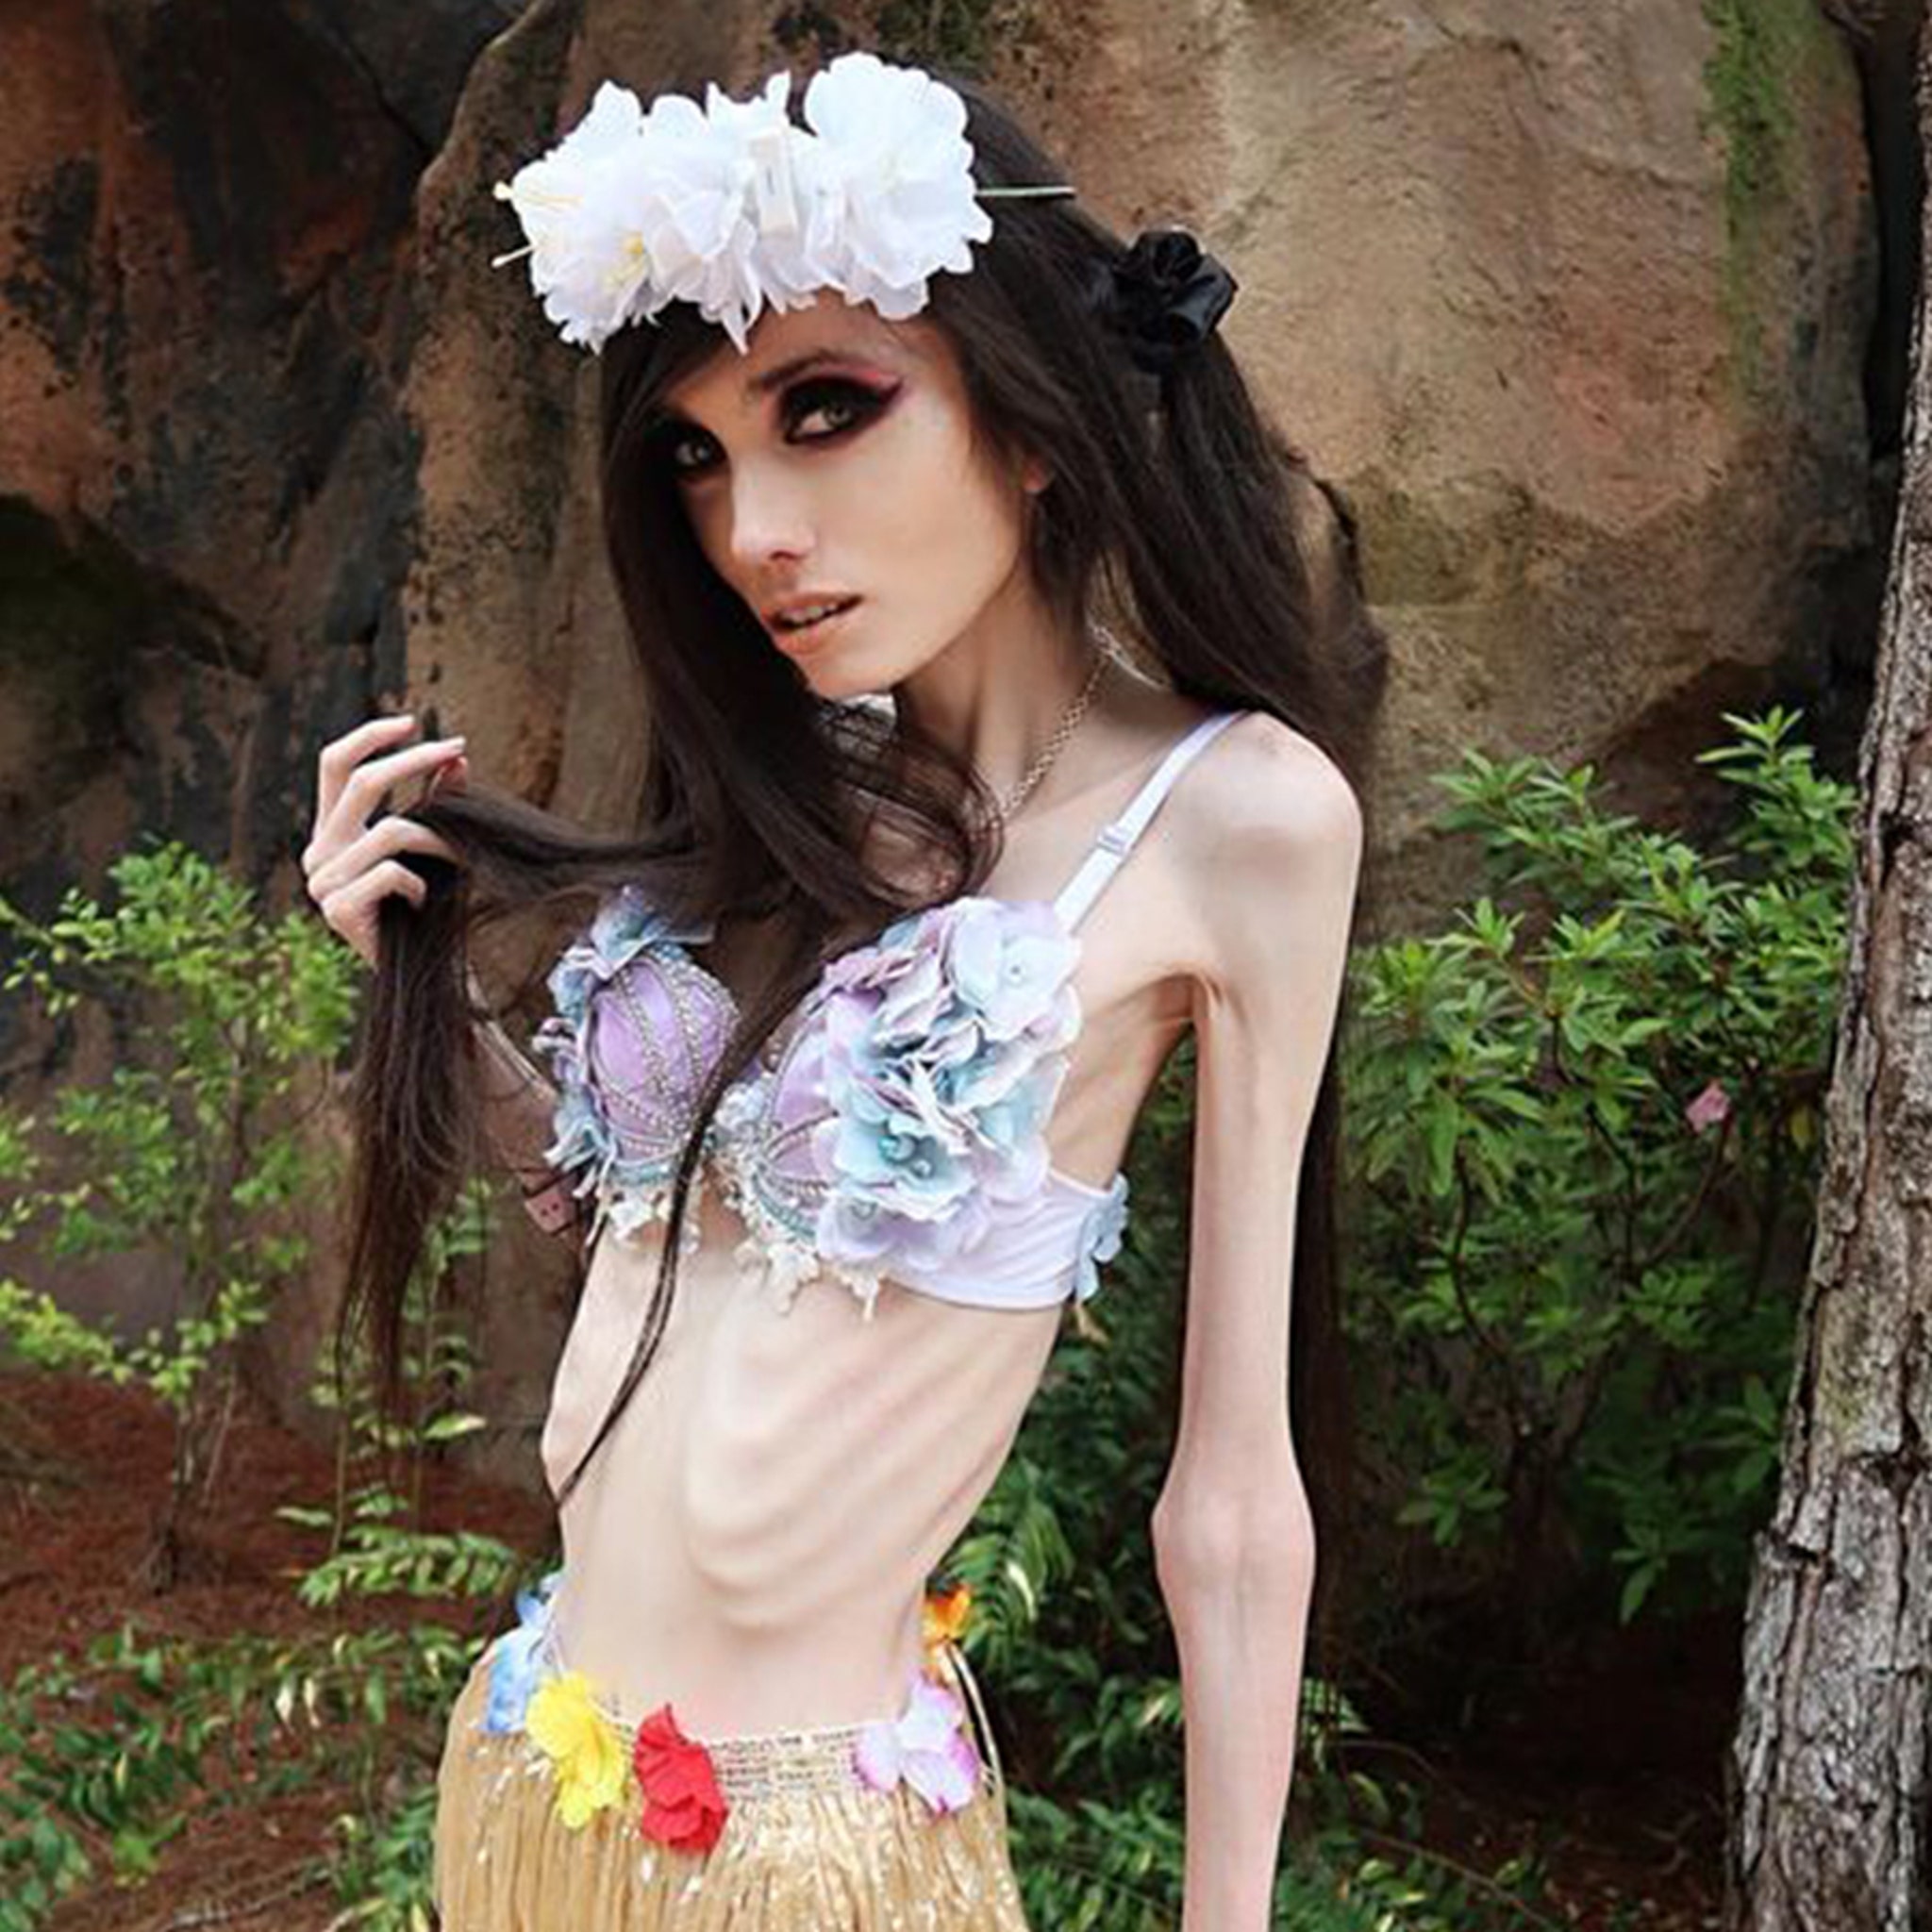 r Eugenia Cooney's Skinny and Frail Appearance Triggers 911 Calls  from Fans